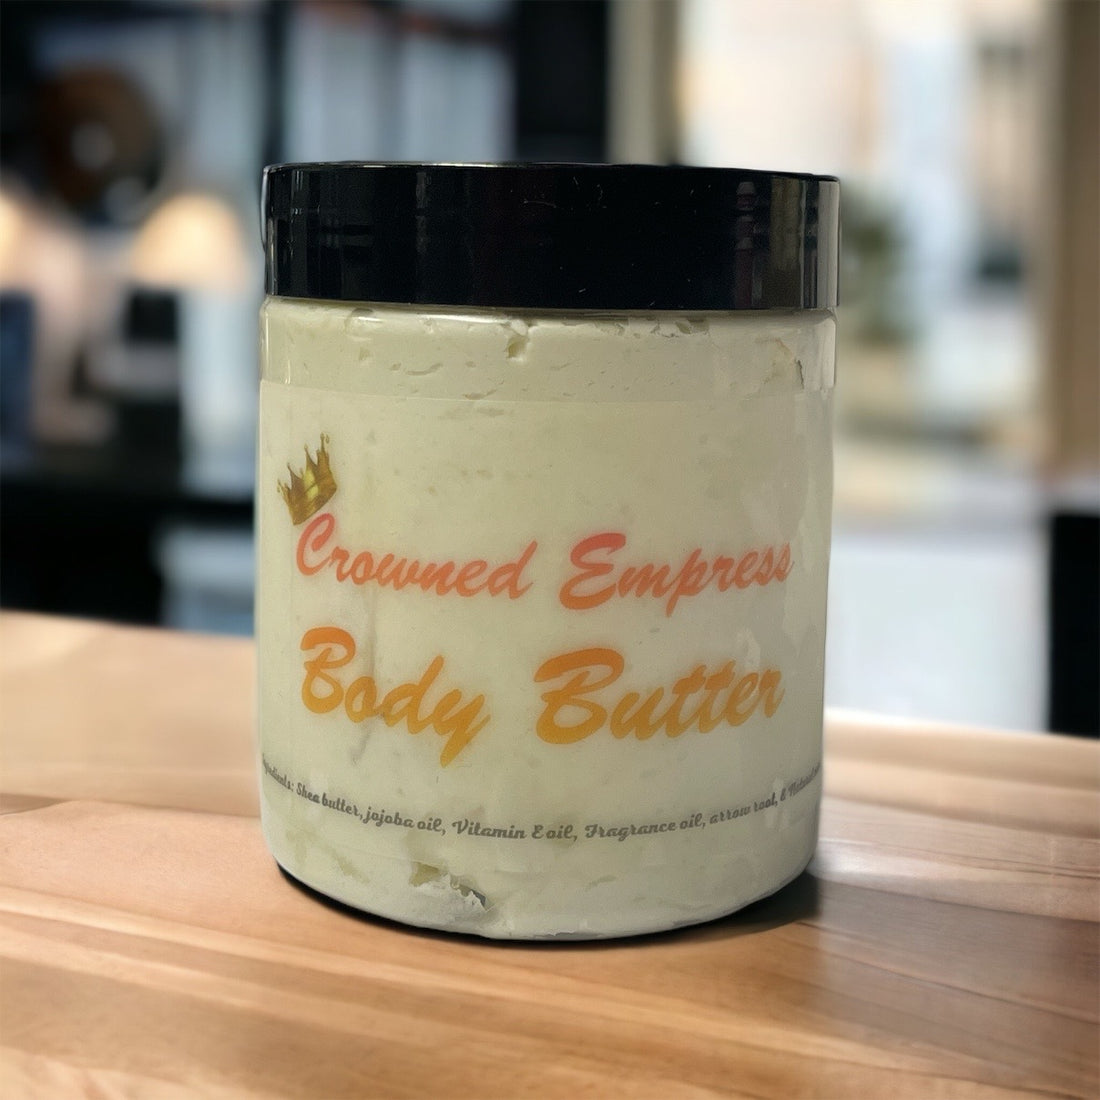 Crowned Empress Body Butter 4 oz